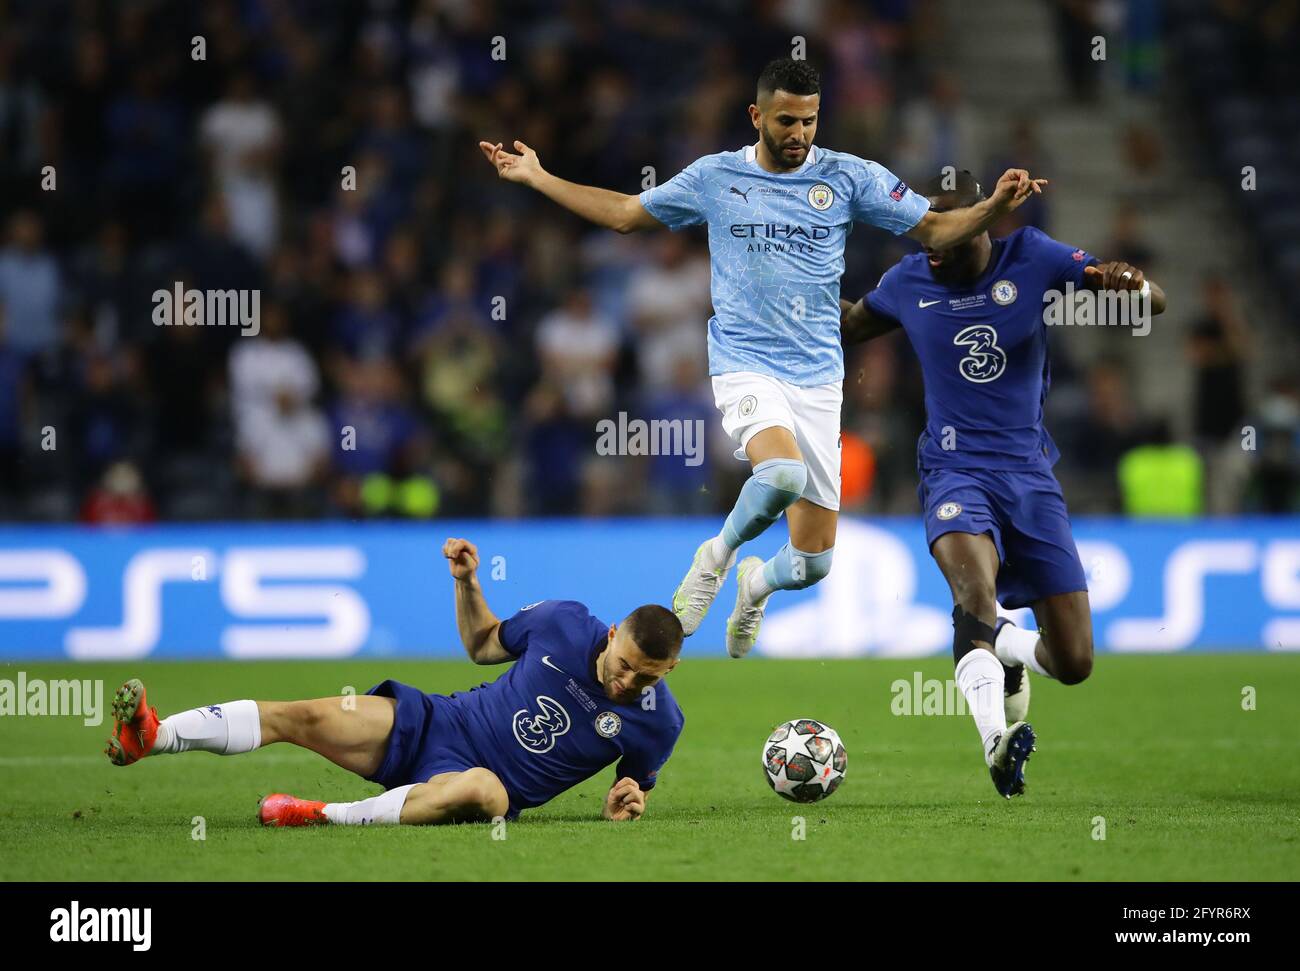 Porto, Portugal, 29th May 2021. Riyad Marhez of Manchester City ships past Mateo Kovacic of Chelseaduring the UEFA Champions League match at the Estadio do Dragao, Porto. Picture credit should read: David Klein / Sportimage Stock Photo